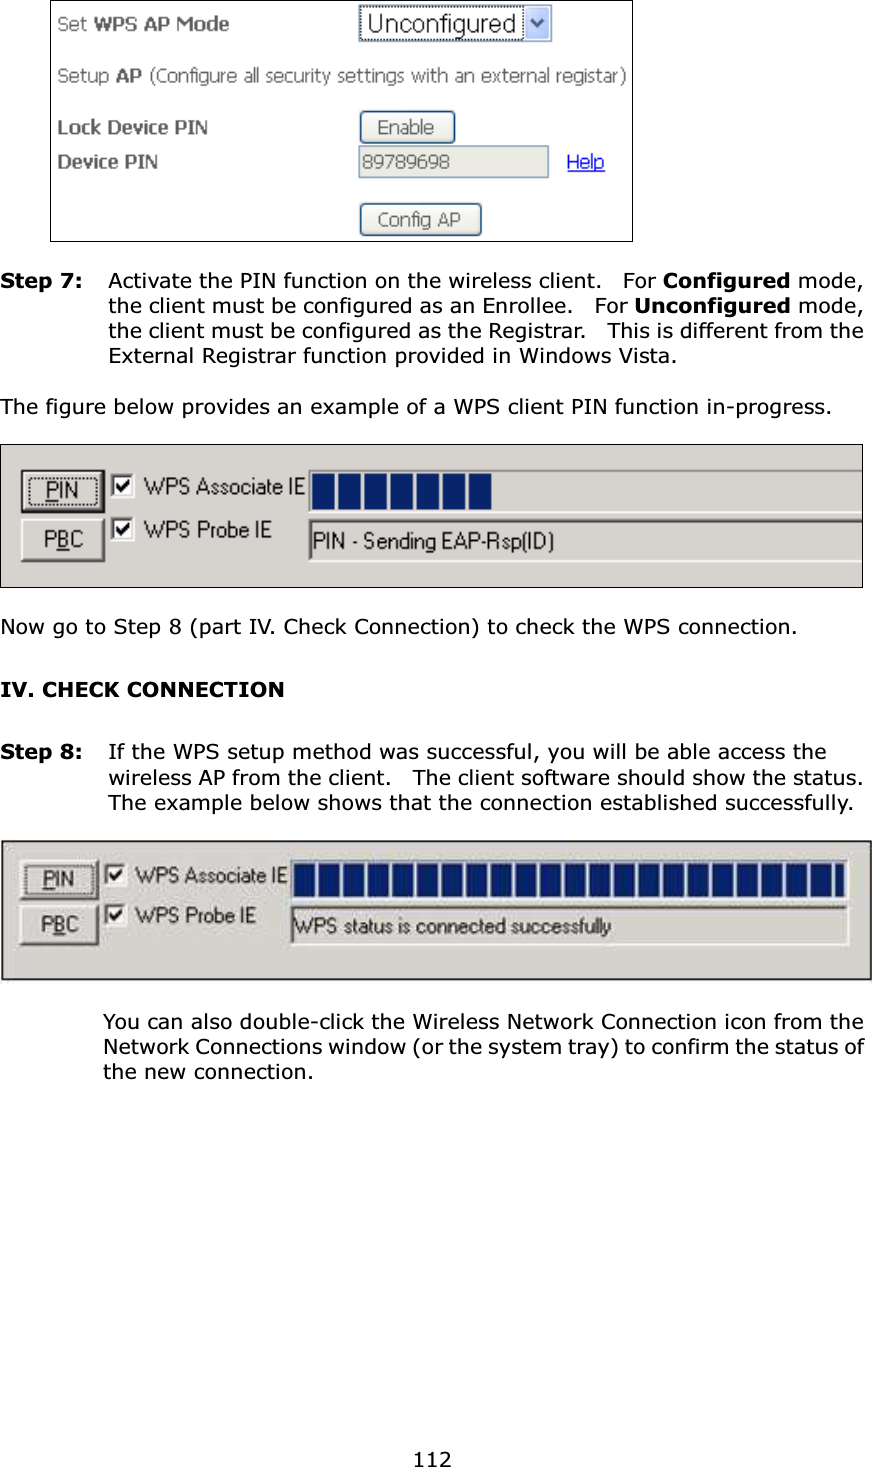  112     Step 7:  Activate the PIN function on the wireless client.    For Configured mode, the client must be configured as an Enrollee.    For Unconfigured mode, the client must be configured as the Registrar.    This is different from the External Registrar function provided in Windows Vista.        The figure below provides an example of a WPS client PIN function in-progress.    Now go to Step 8 (part IV. Check Connection) to check the WPS connection. IV. CHECK CONNECTION Step 8:  If the WPS setup method was successful, you will be able access the wireless AP from the client.    The client software should show the status.   The example below shows that the connection established successfully.      You can also double-click the Wireless Network Connection icon from the Network Connections window (or the system tray) to confirm the status of the new connection. 